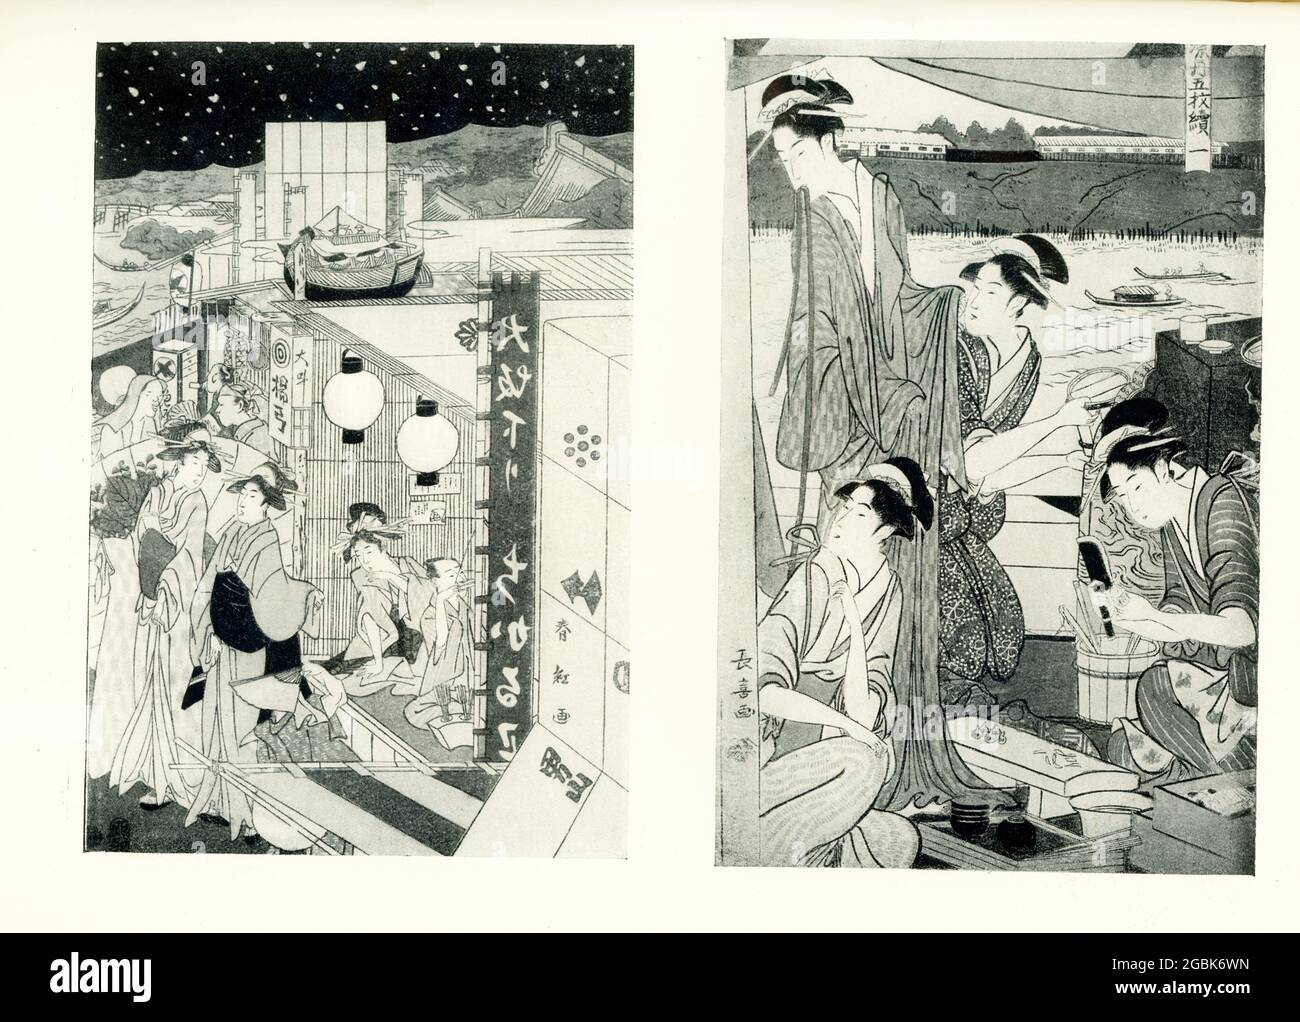 LEFT: Shunko or Shunbeni One sheet of a triptych. Street scene at night; two women passing by an archery-shooting gallery; signed Shunk; seal-dated for 4th month 1807. RIGHT: Choki: One sheet (No. 1) of a pentatypch. “Evening Cooling”; women preparing a meal on a large pleasure boat on the Sumida river; signed Choki; publisher, Tsuta-ya Stock Photo